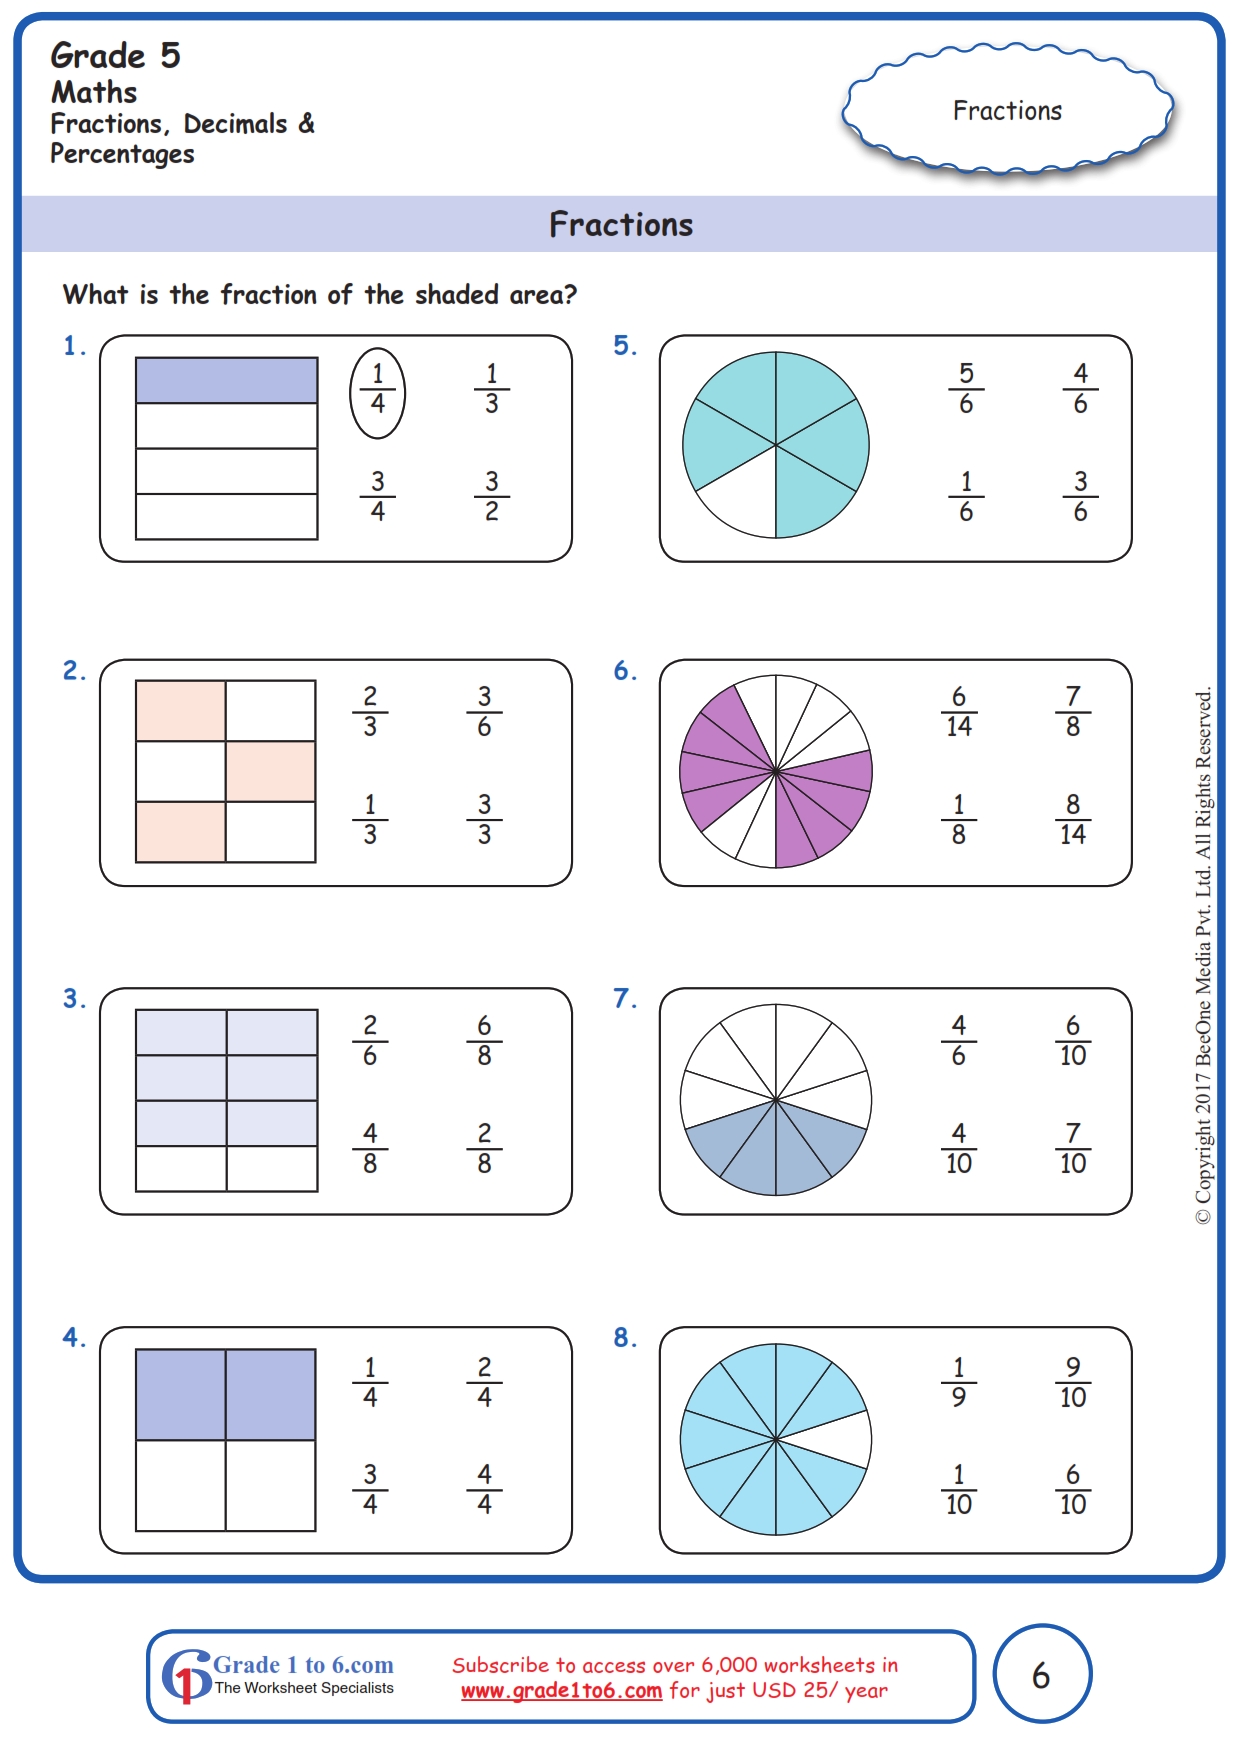 Fraction of Shaded Area Worksheets Grade1to6 com